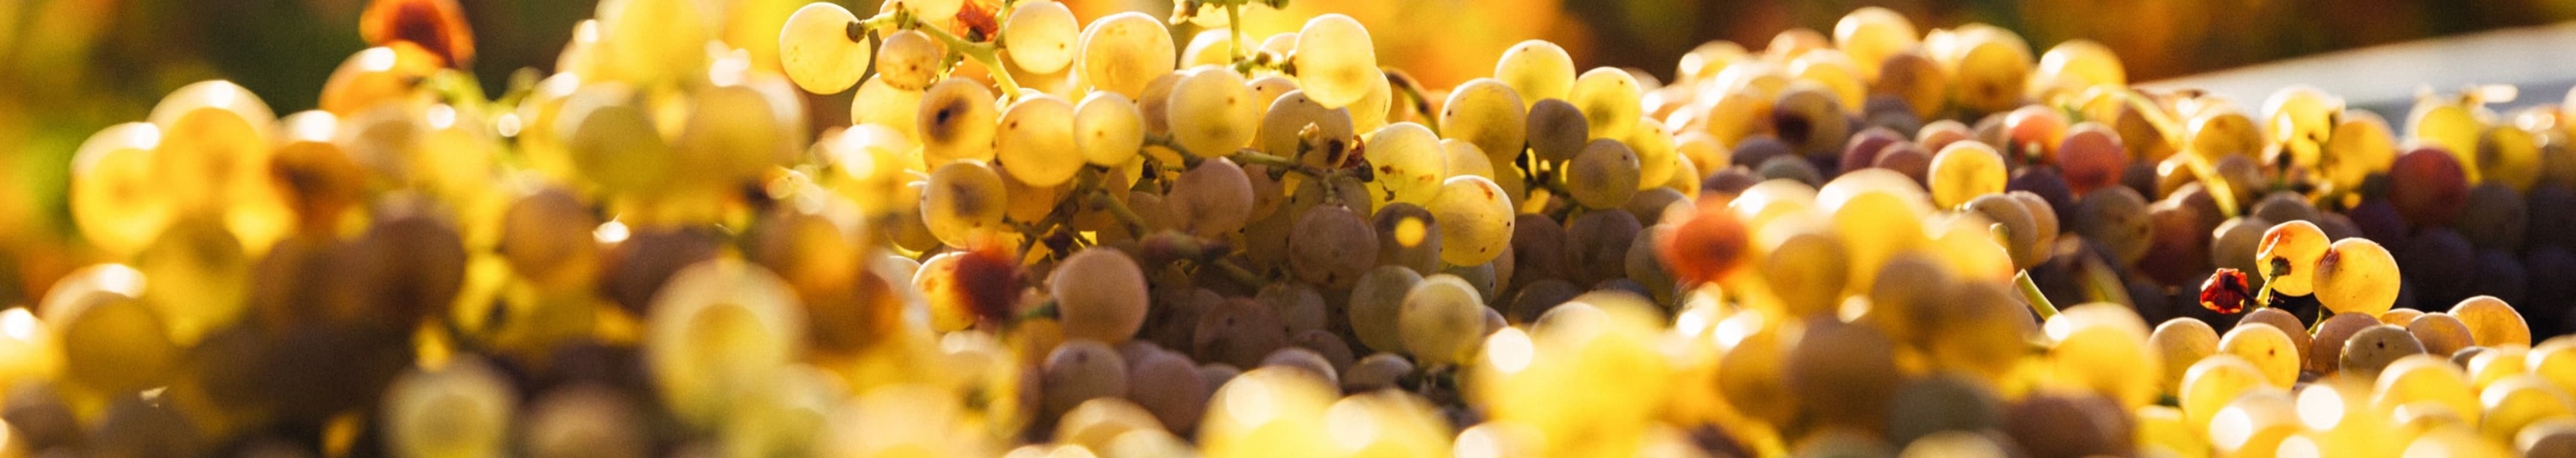 White wines are produced using pale-skinned grape varietals with very little exposure to their skins during vinification. In fact, most skins are separated from the juice right before fermentation begins.